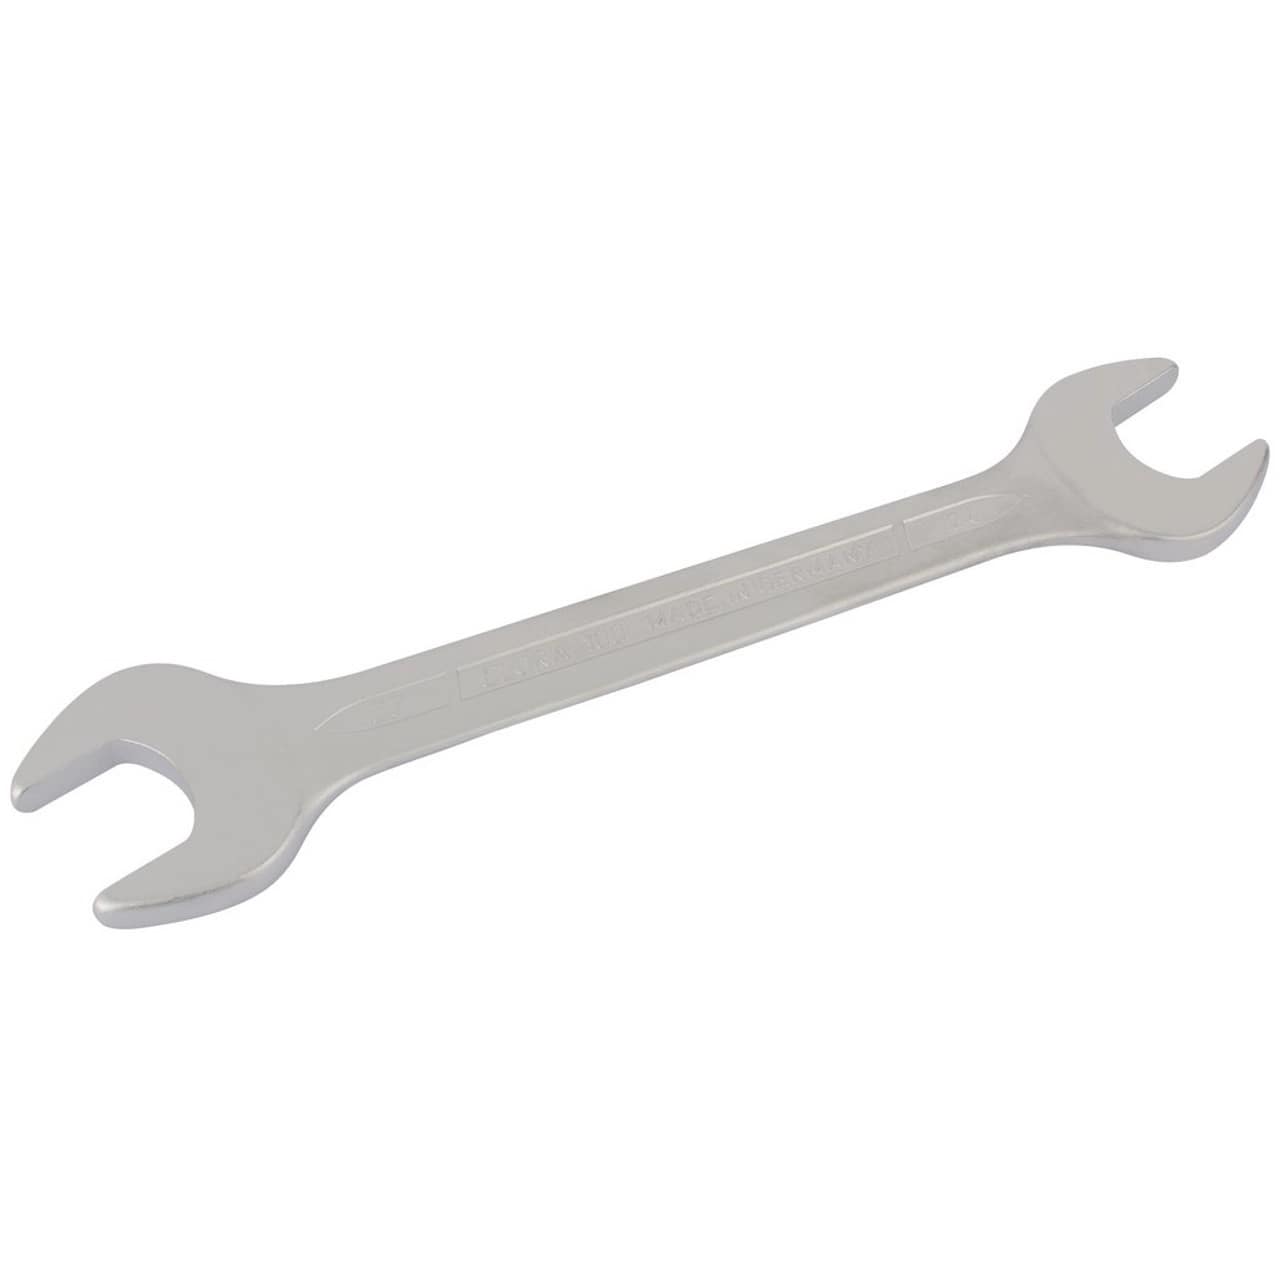 Elora 02034 24 x 27mm Double Open End Spanner